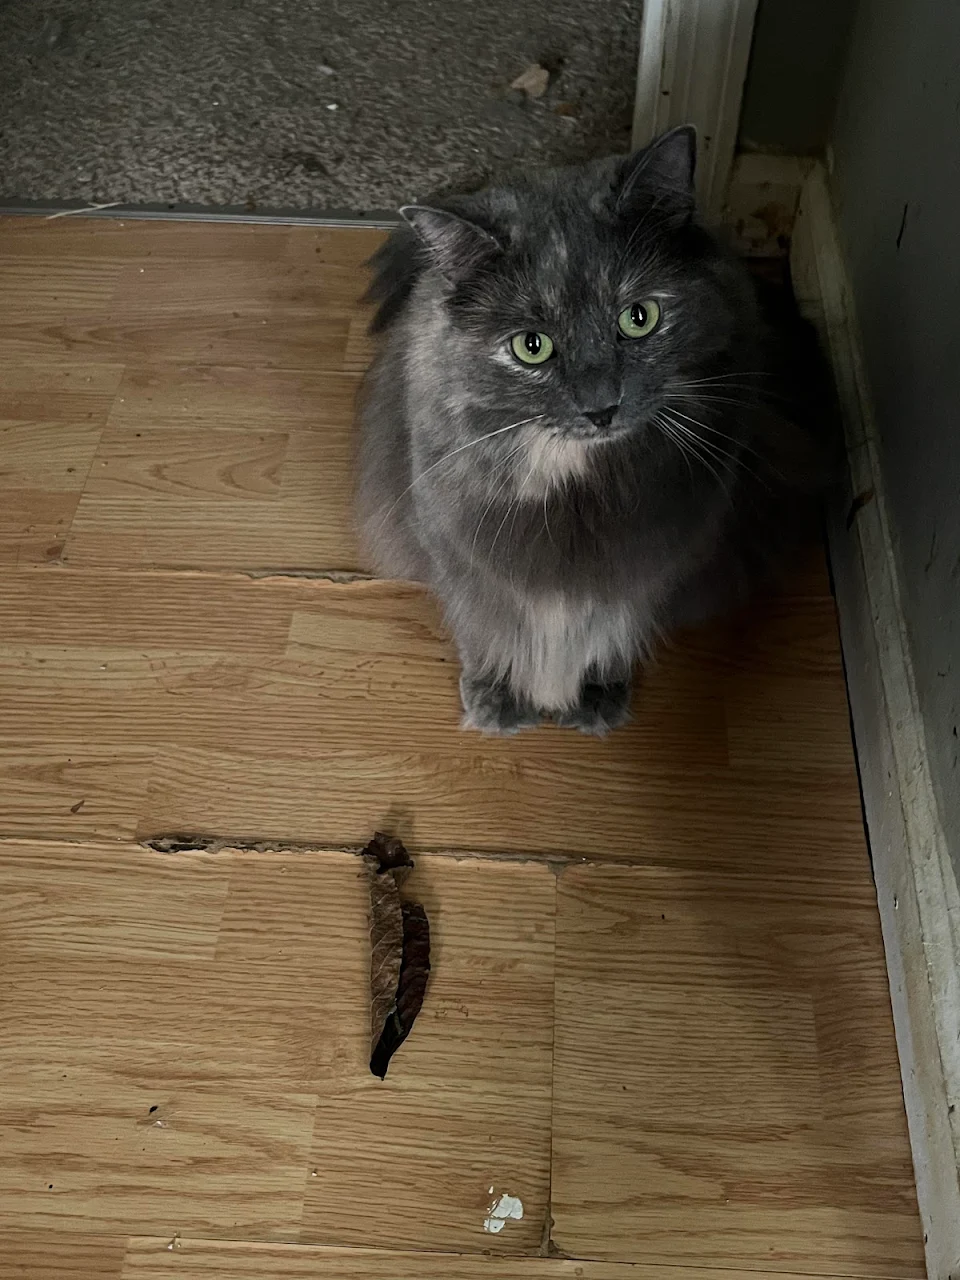 Behold! The mighty hunter with her prey, the dried leaf.